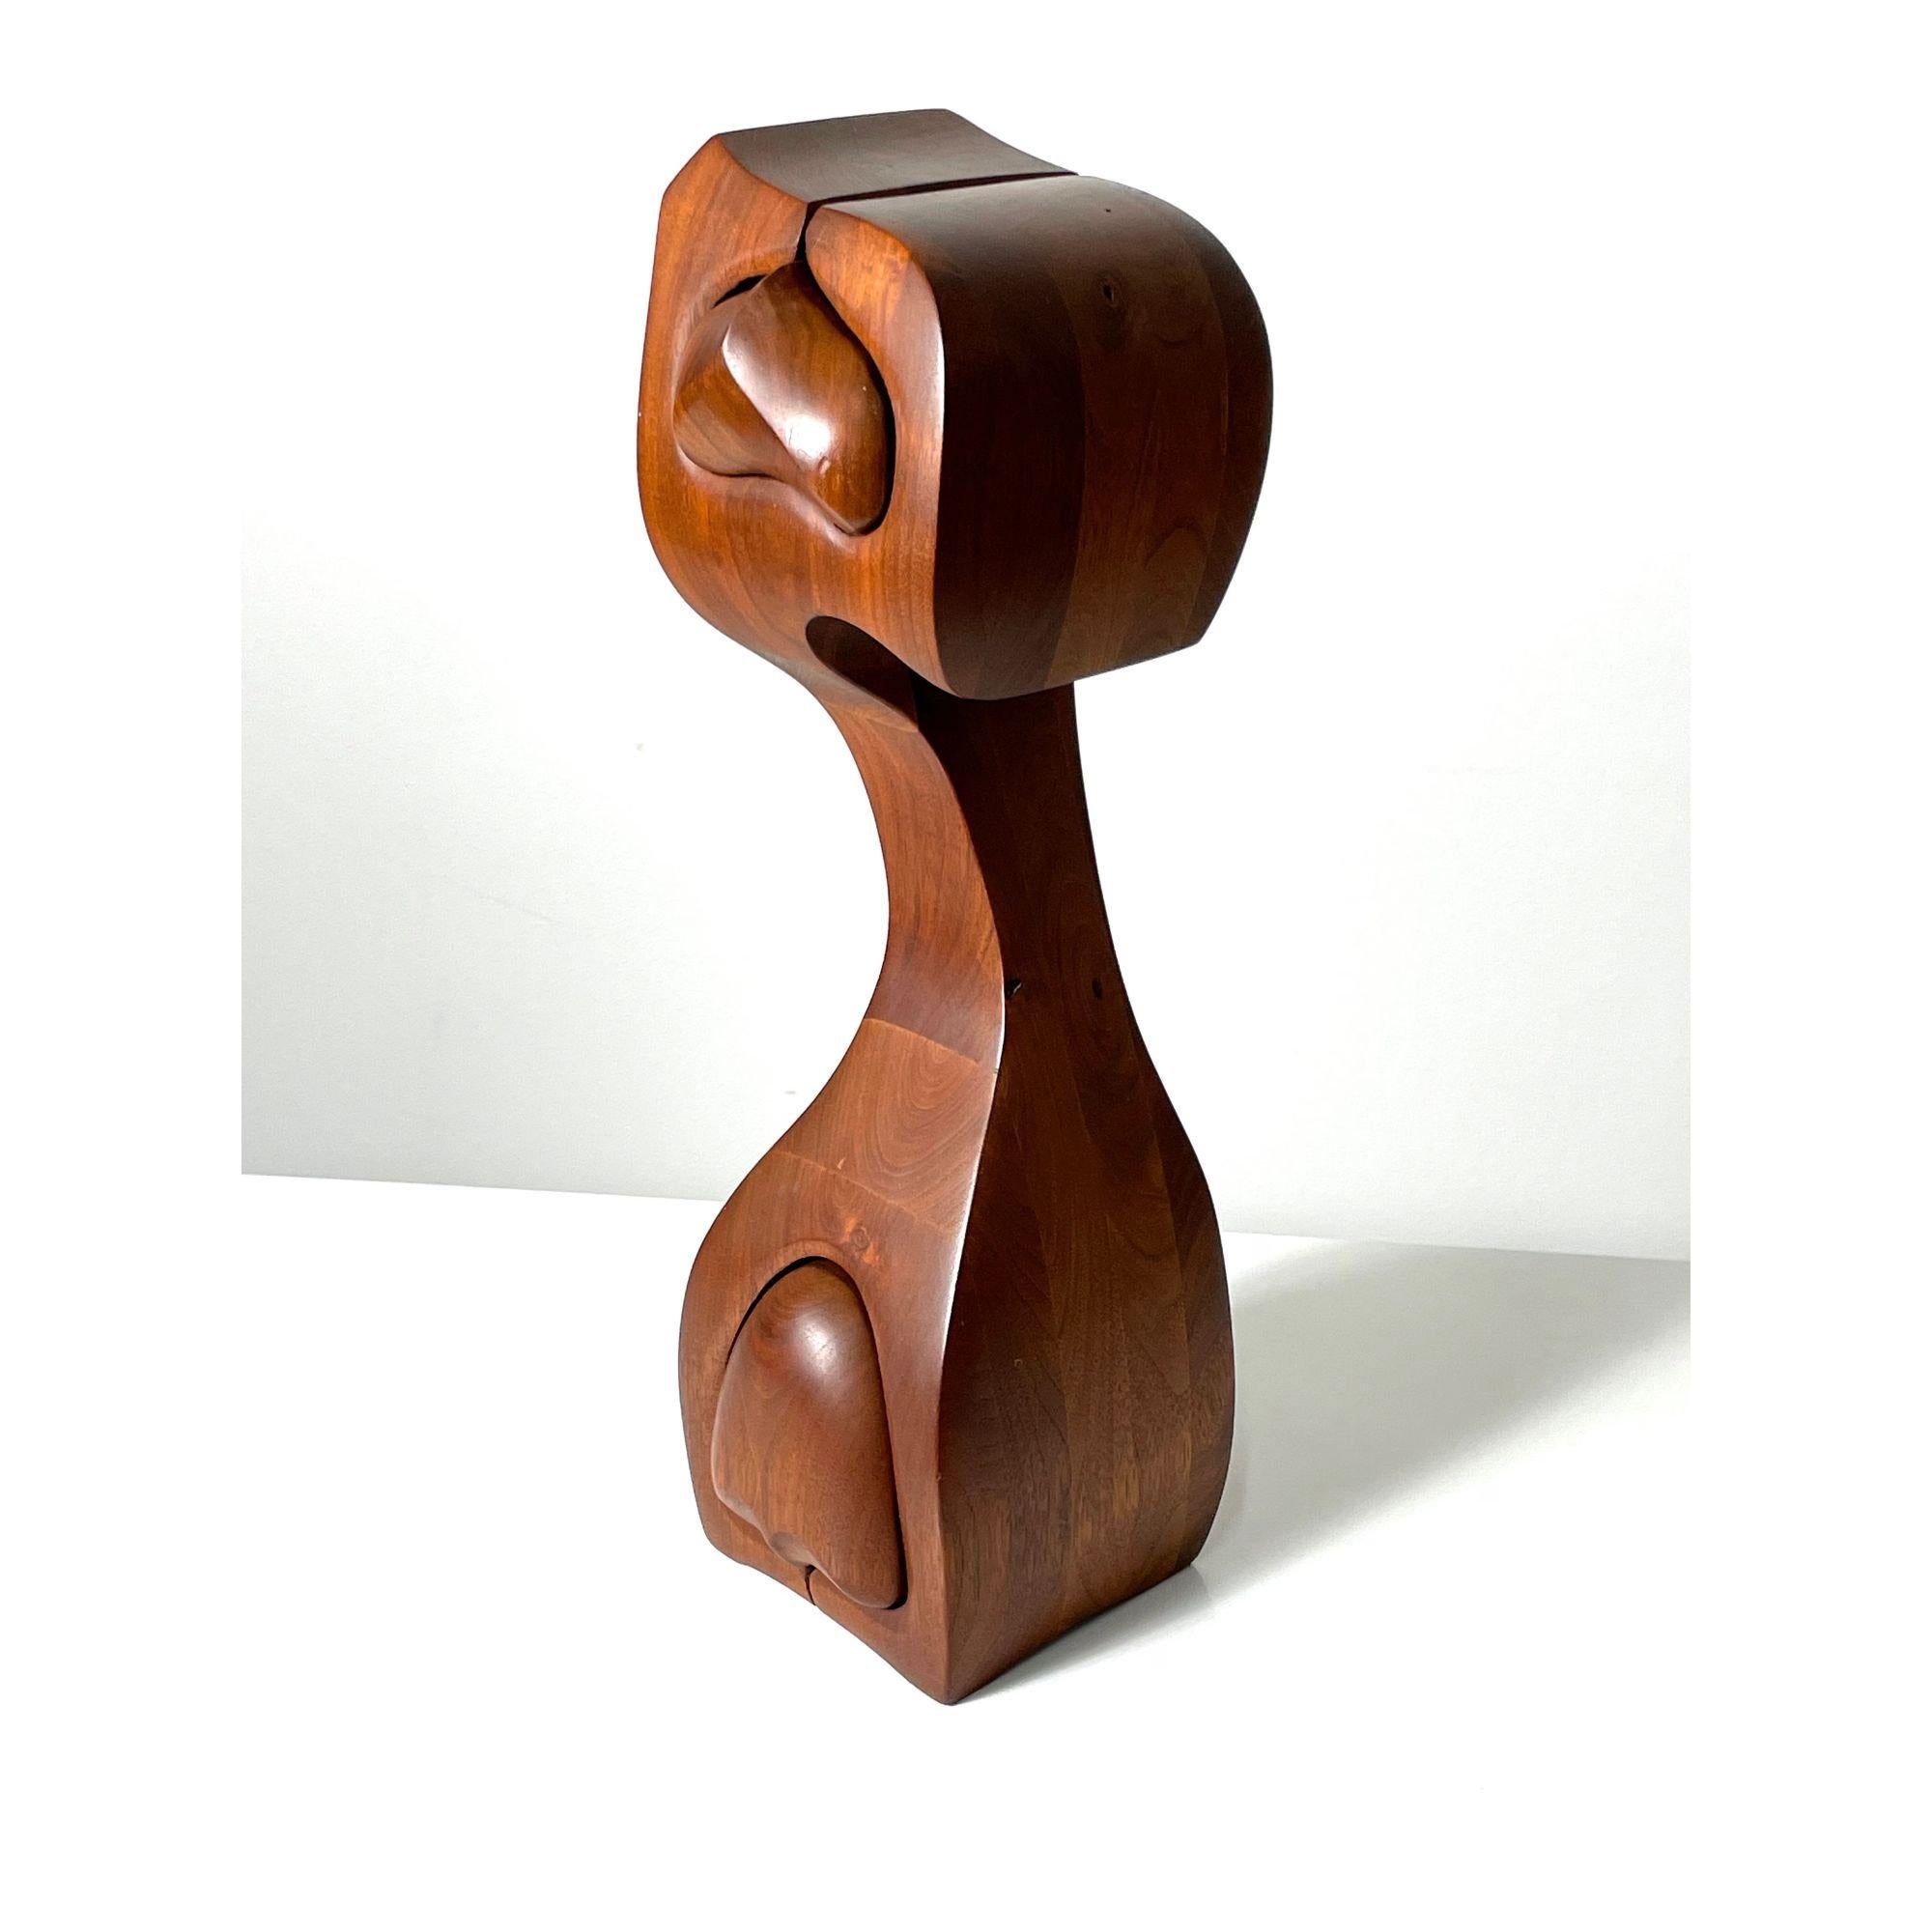 Signed vintage Studio Craft Walnut Puzzle Box 

Signed Bob Goldsmith puzzle box titled Rosie's Desire 1982
Carved walnut abstract form with two slide through drawers
Signed to underside

Additional Information:
Materials: Walnut
Dimensions: 7